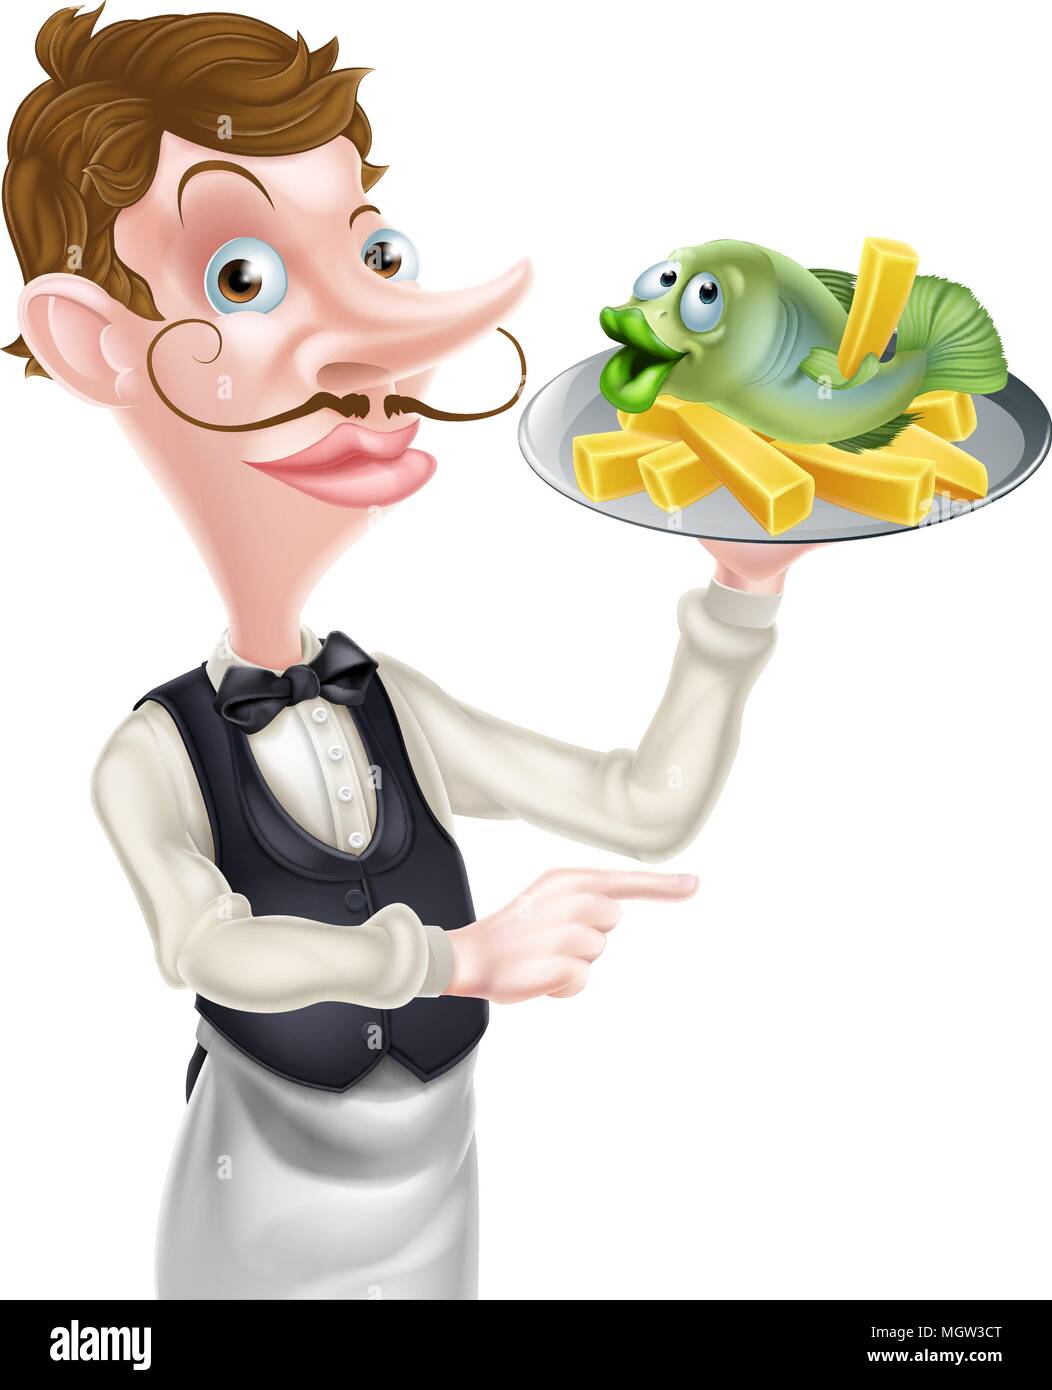 Cartoon Waiter Butler Holding Fish and Chips Stock Vector